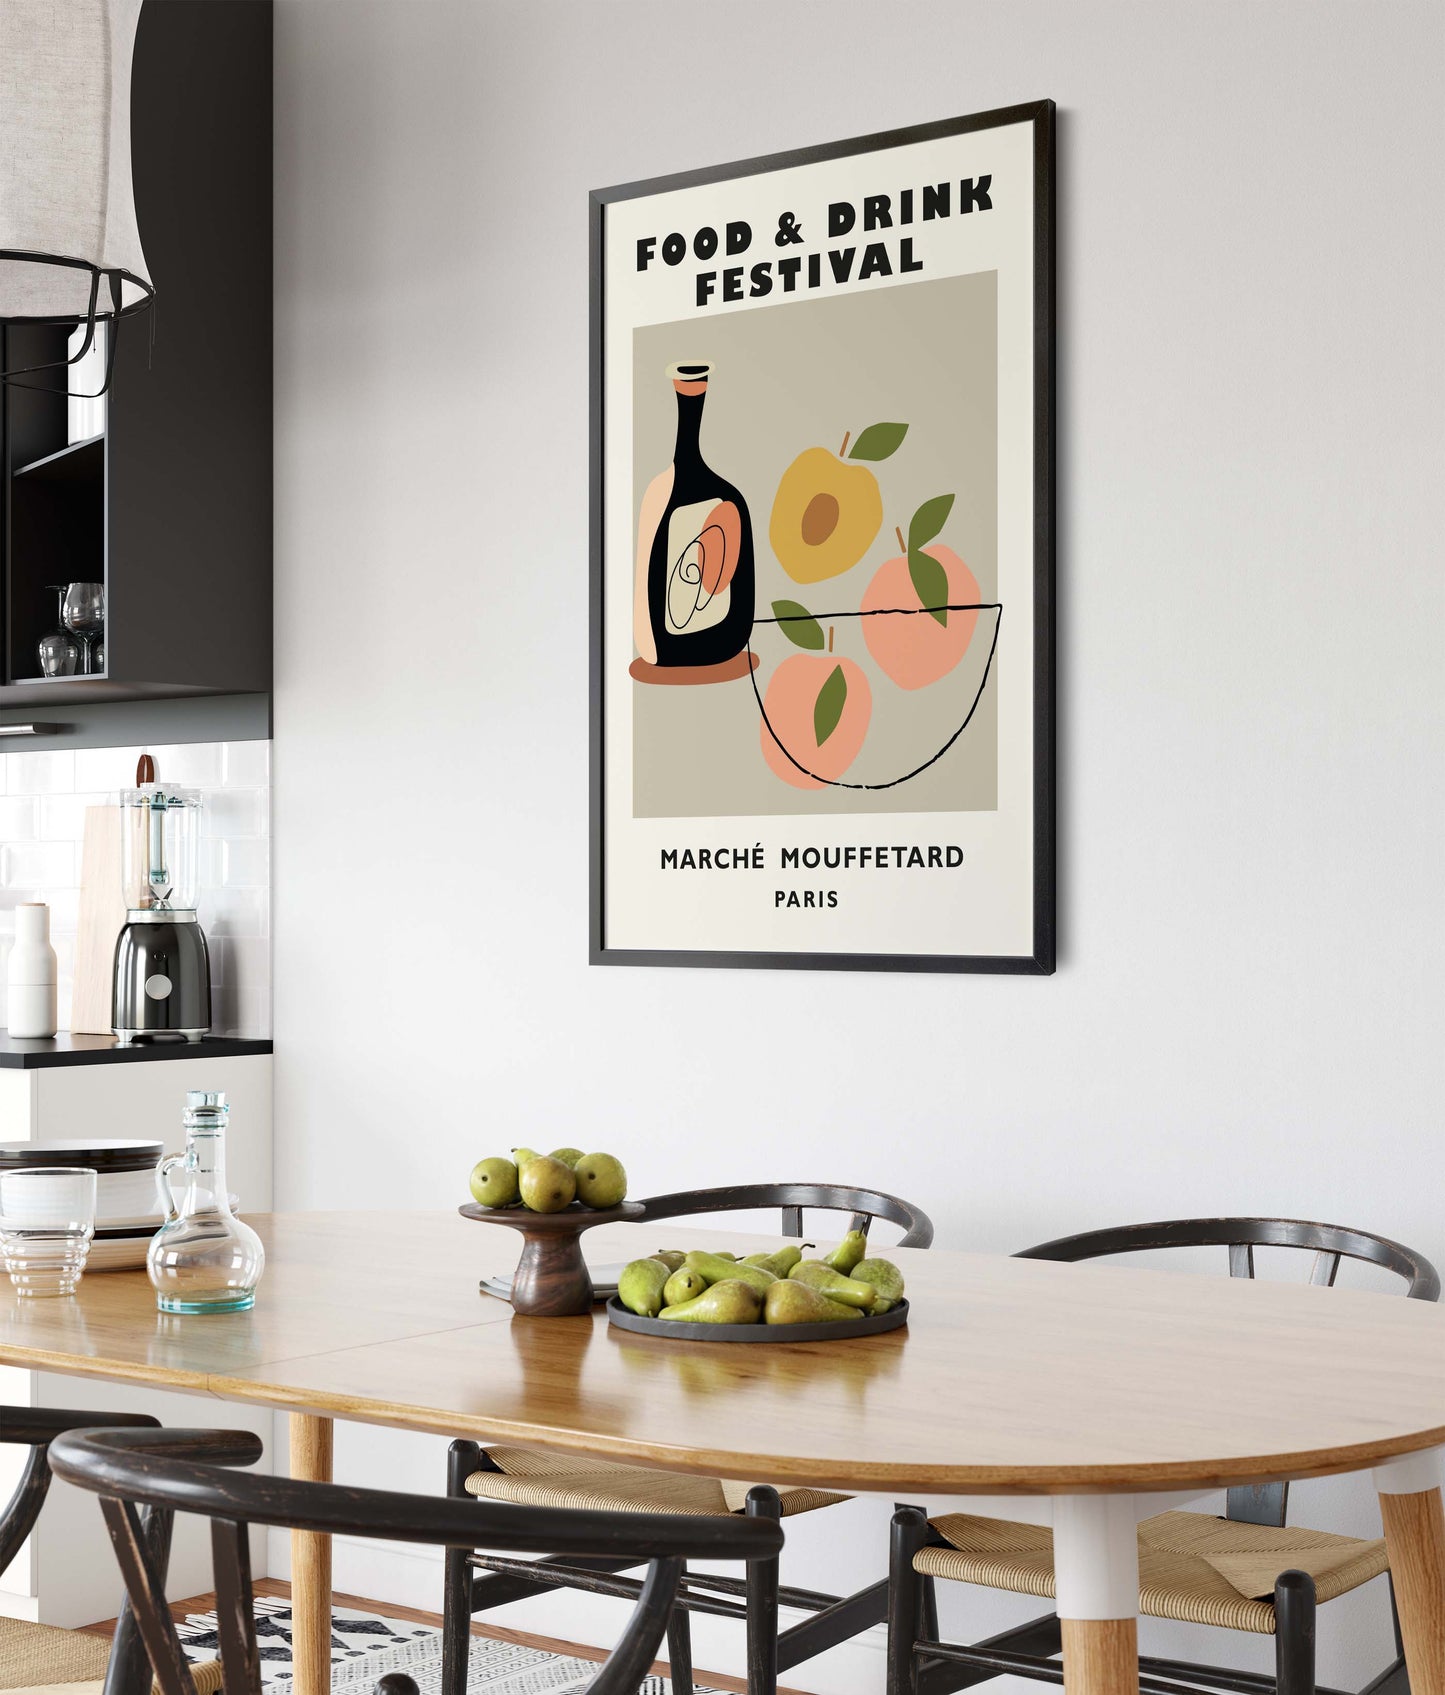 Poster for the kitchen in a minimalist style with a food and drink festival design